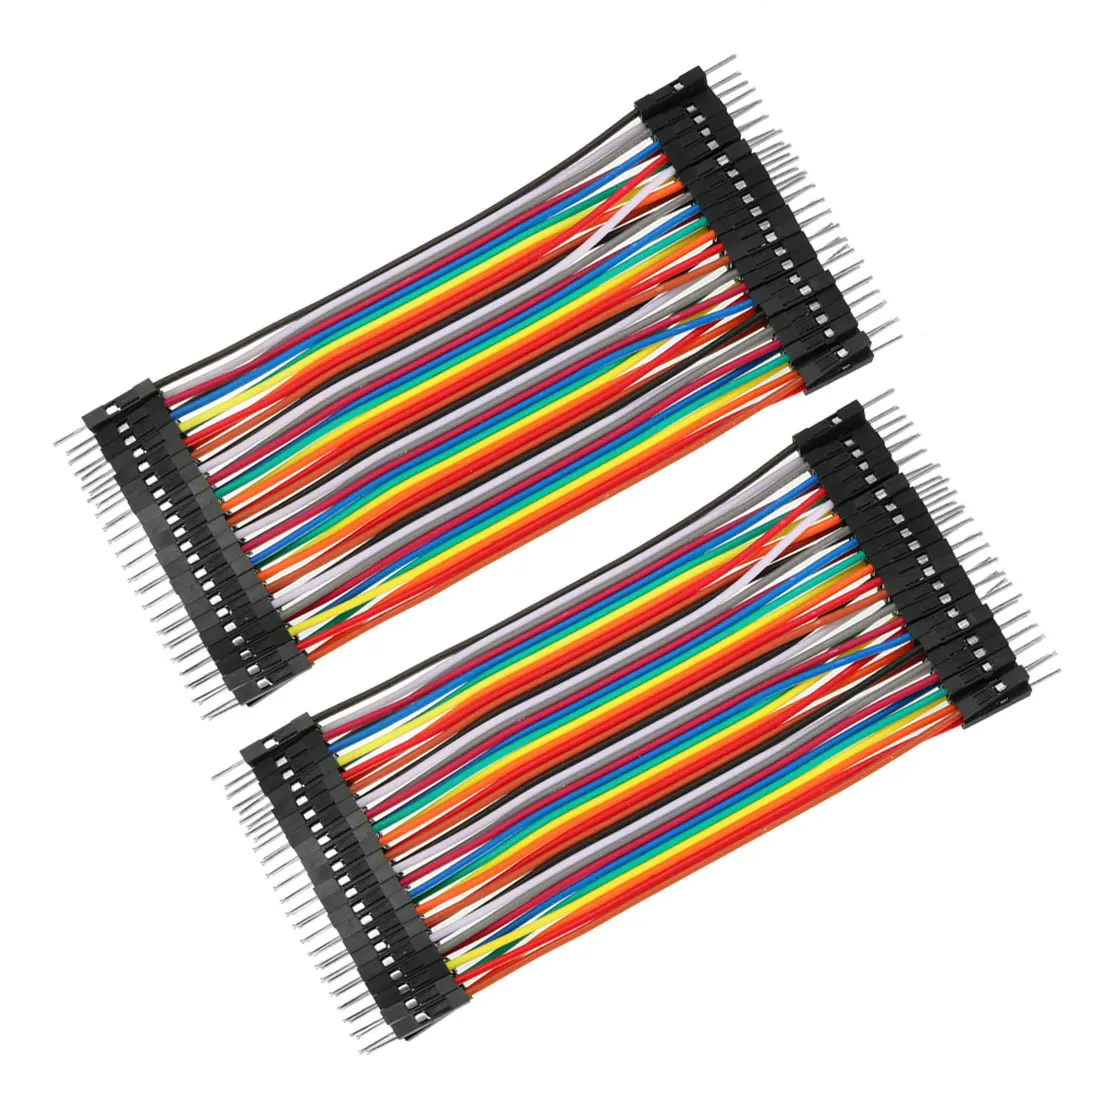 

2Pcs 40Pin Male to Male Breadboard Jumper Wire 2.54mm Pitch Ribbon Cable 11cm Length for PCB Projects